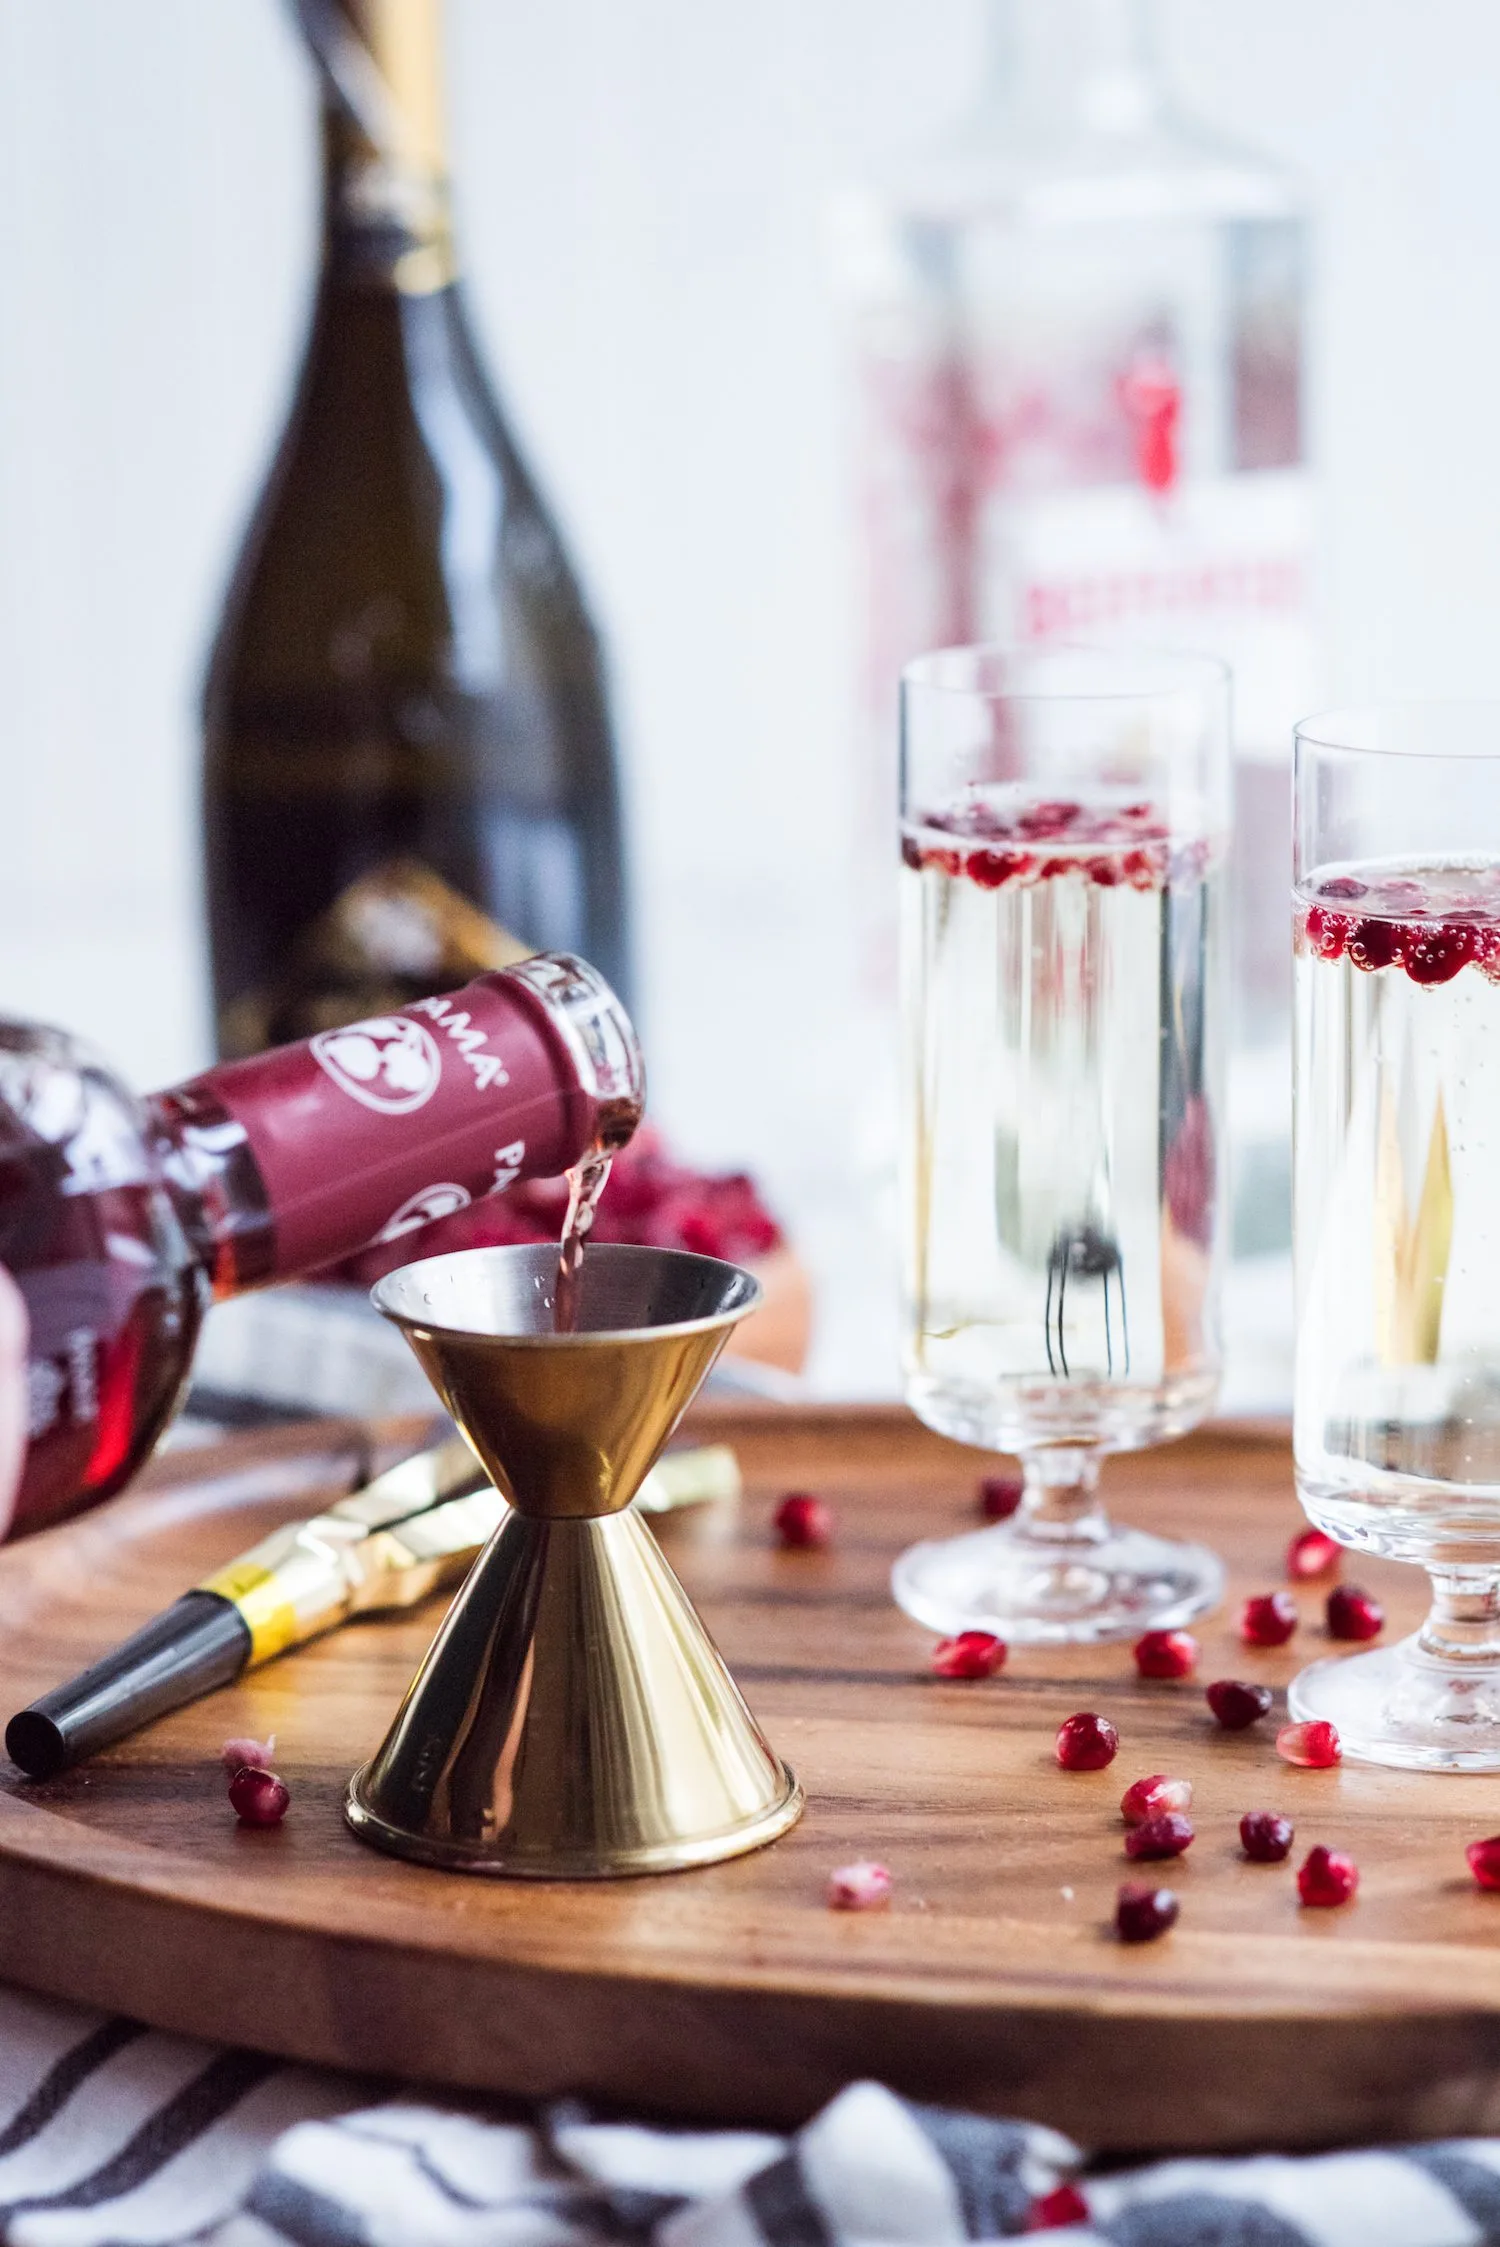 Sparkling Pomegranate French 75 Recipe | New Year's Eve cocktail recipes, entertaining tips, New Year's Eve party ideas and more from @cydconverse